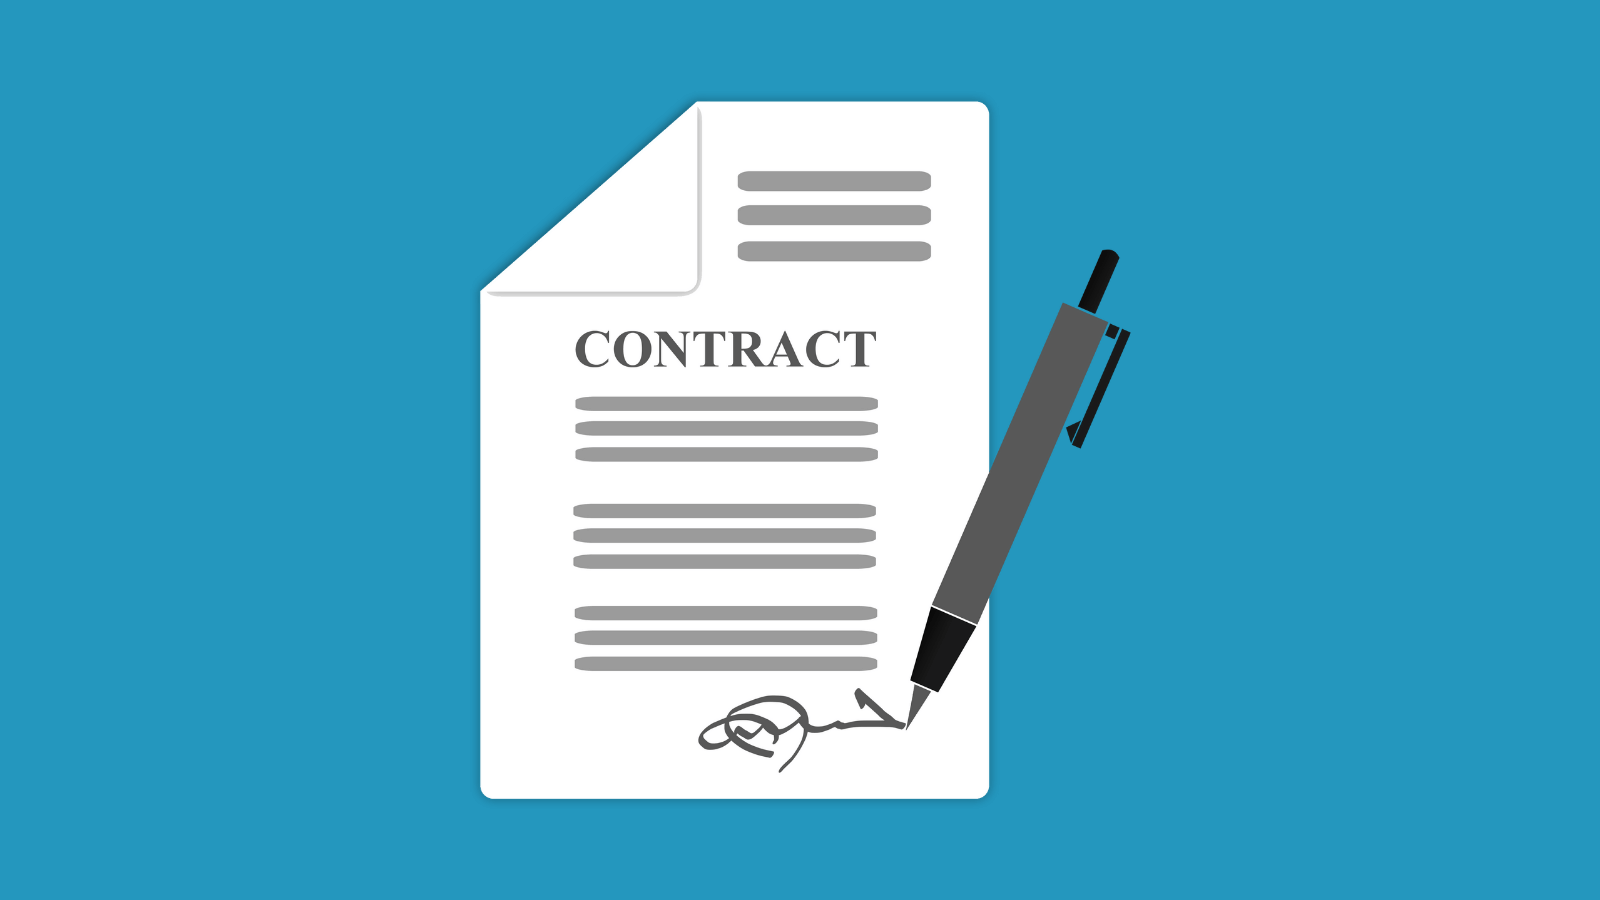 A graphic of a contract